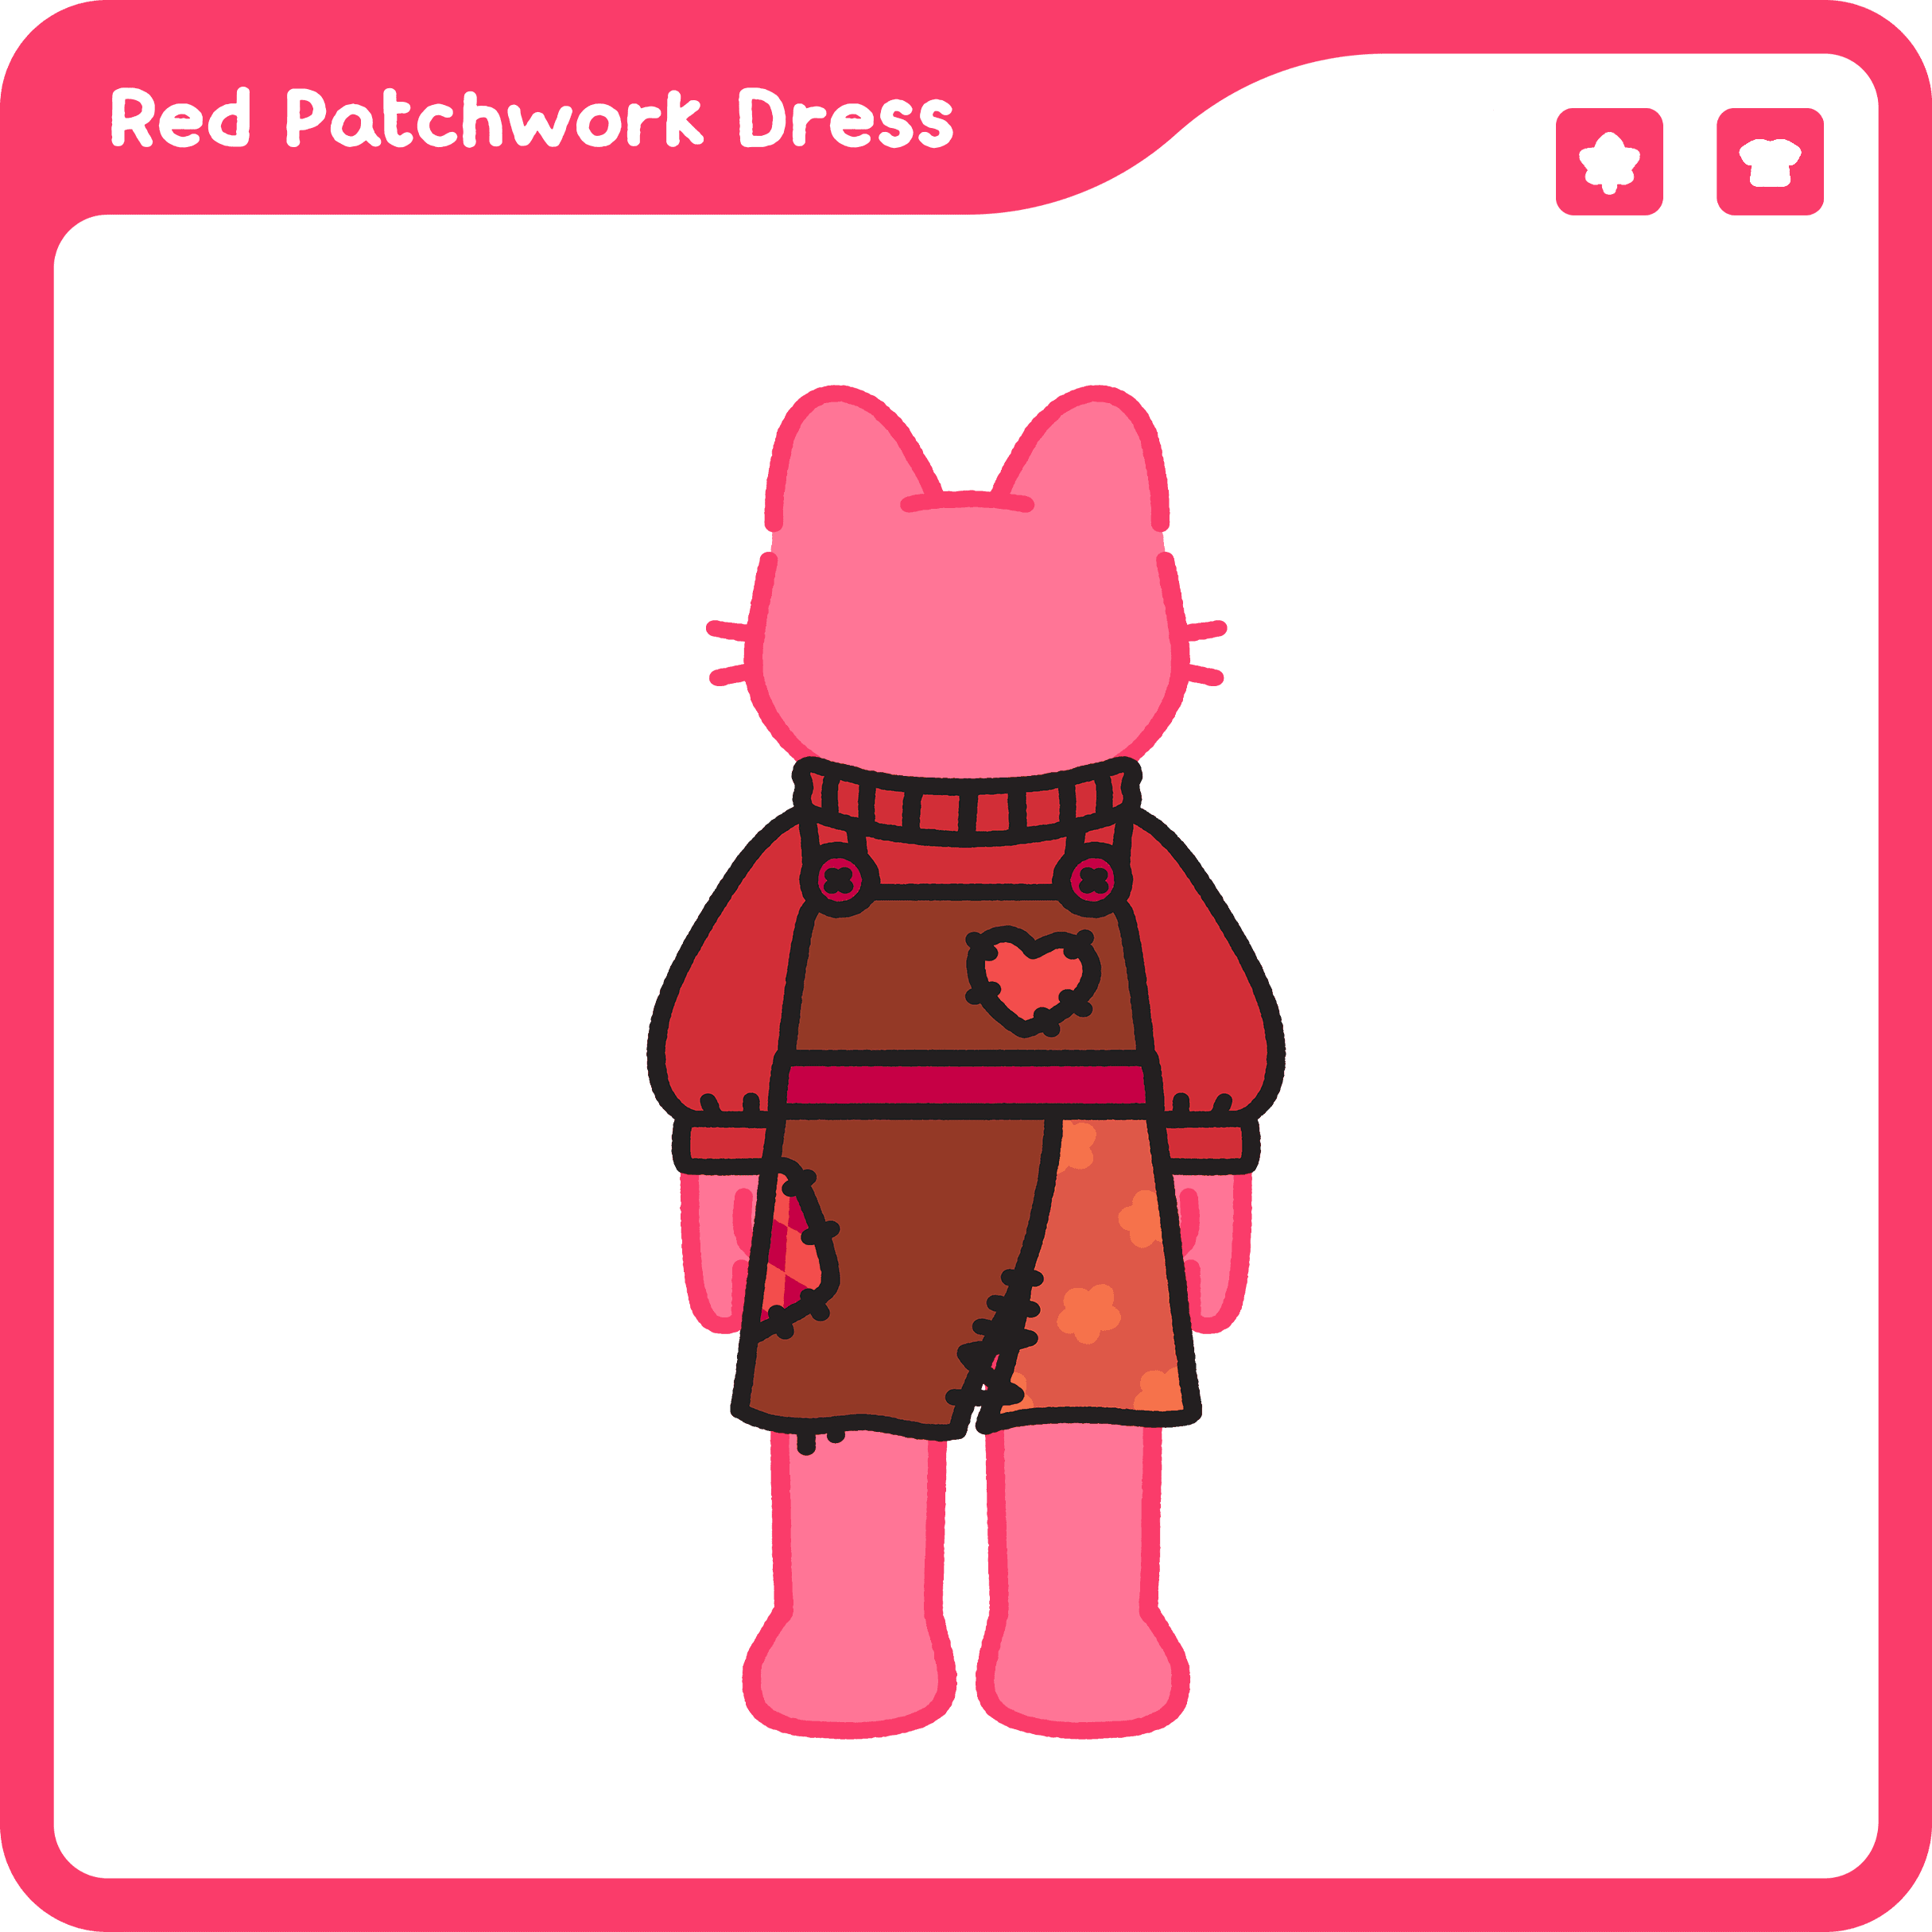 Red Patchwork Dress